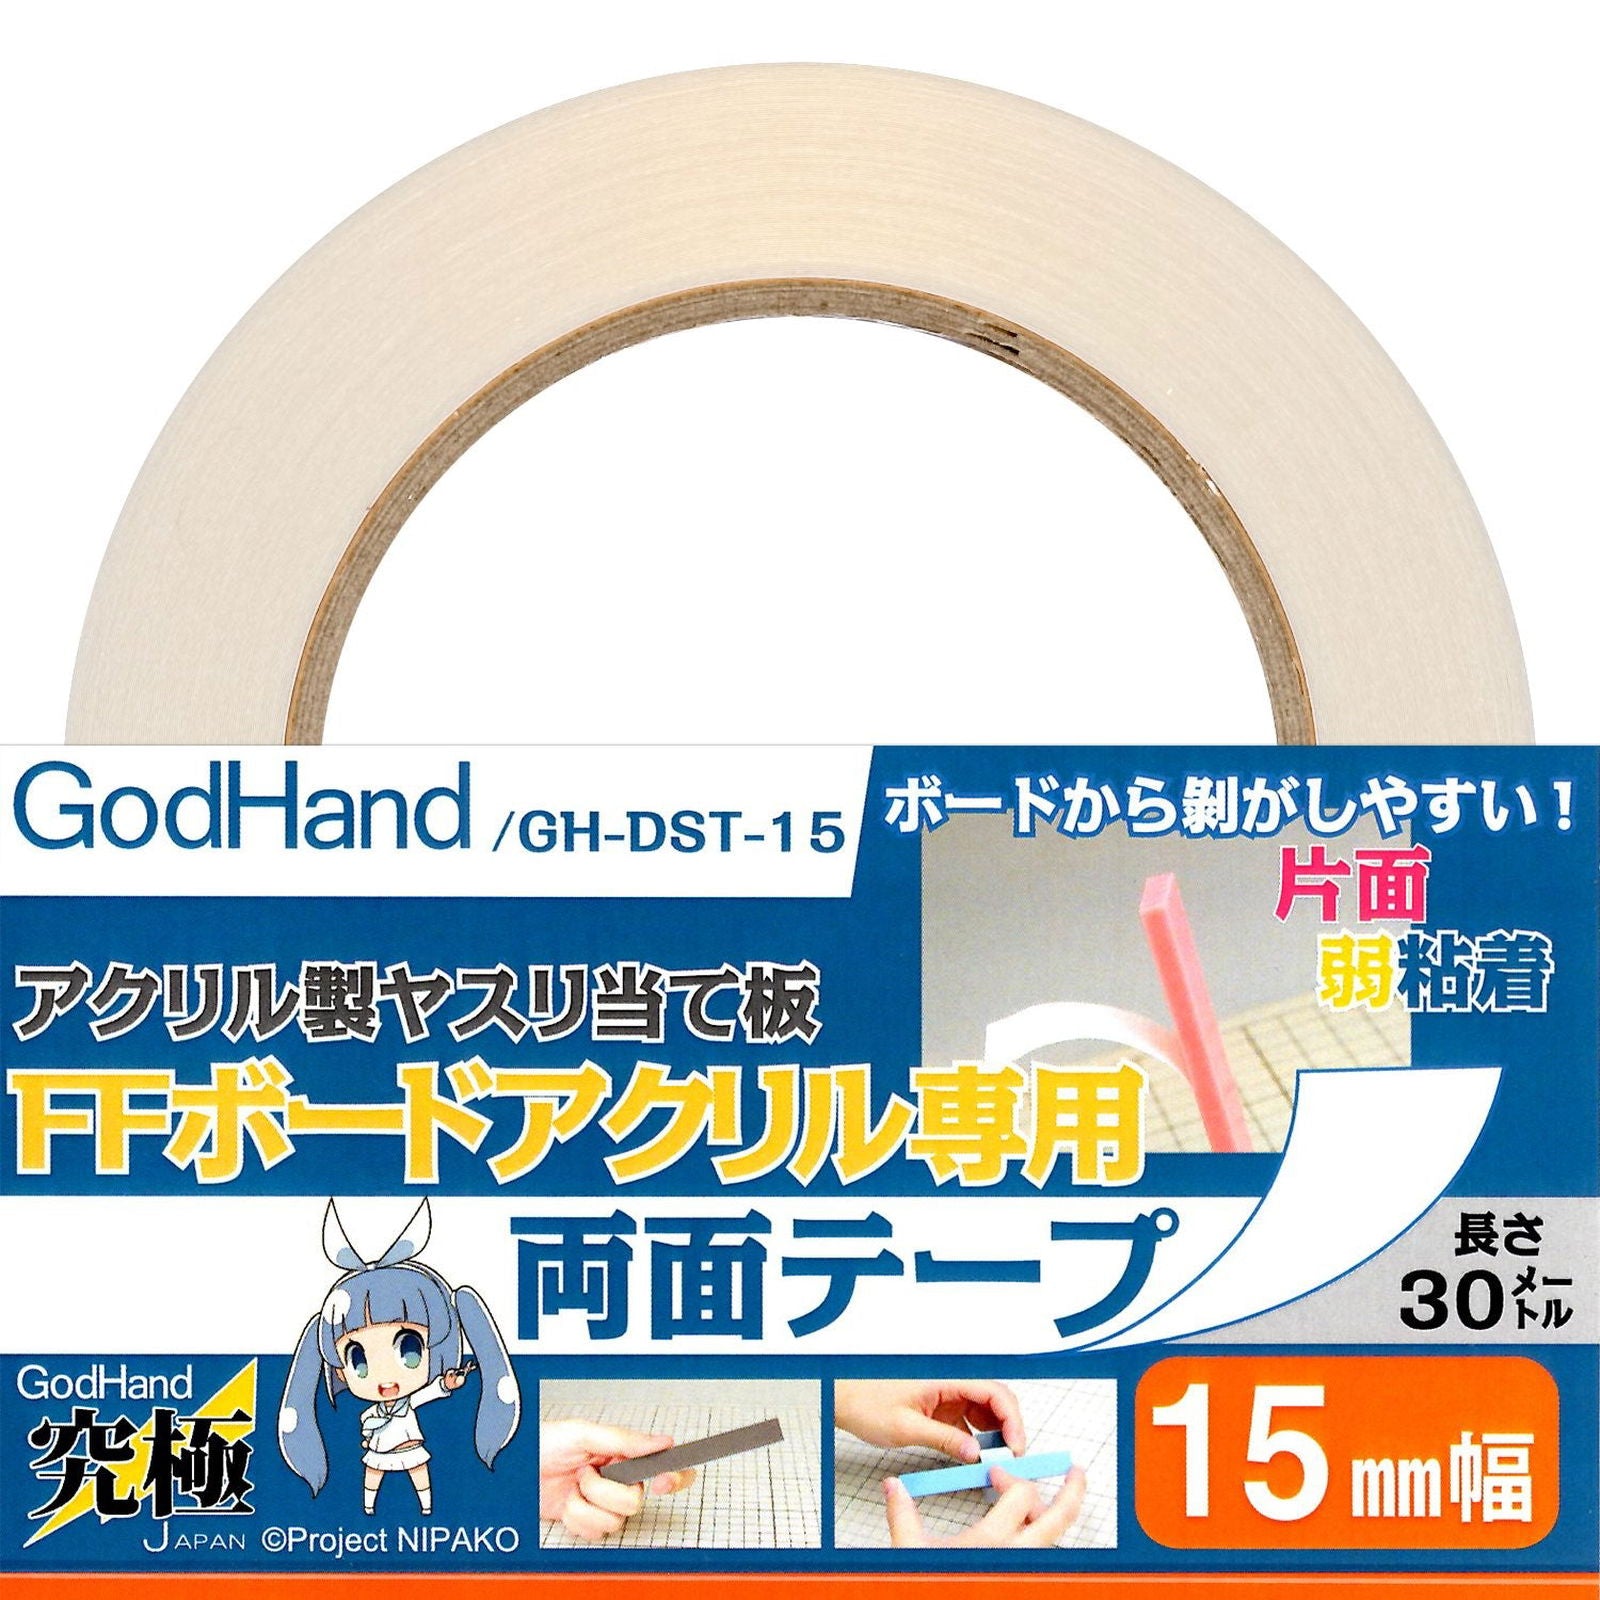 God Hand GH-DST-15 Double-sided Tape (15mm Width) for Mini FF Board Acryl - BanzaiHobby